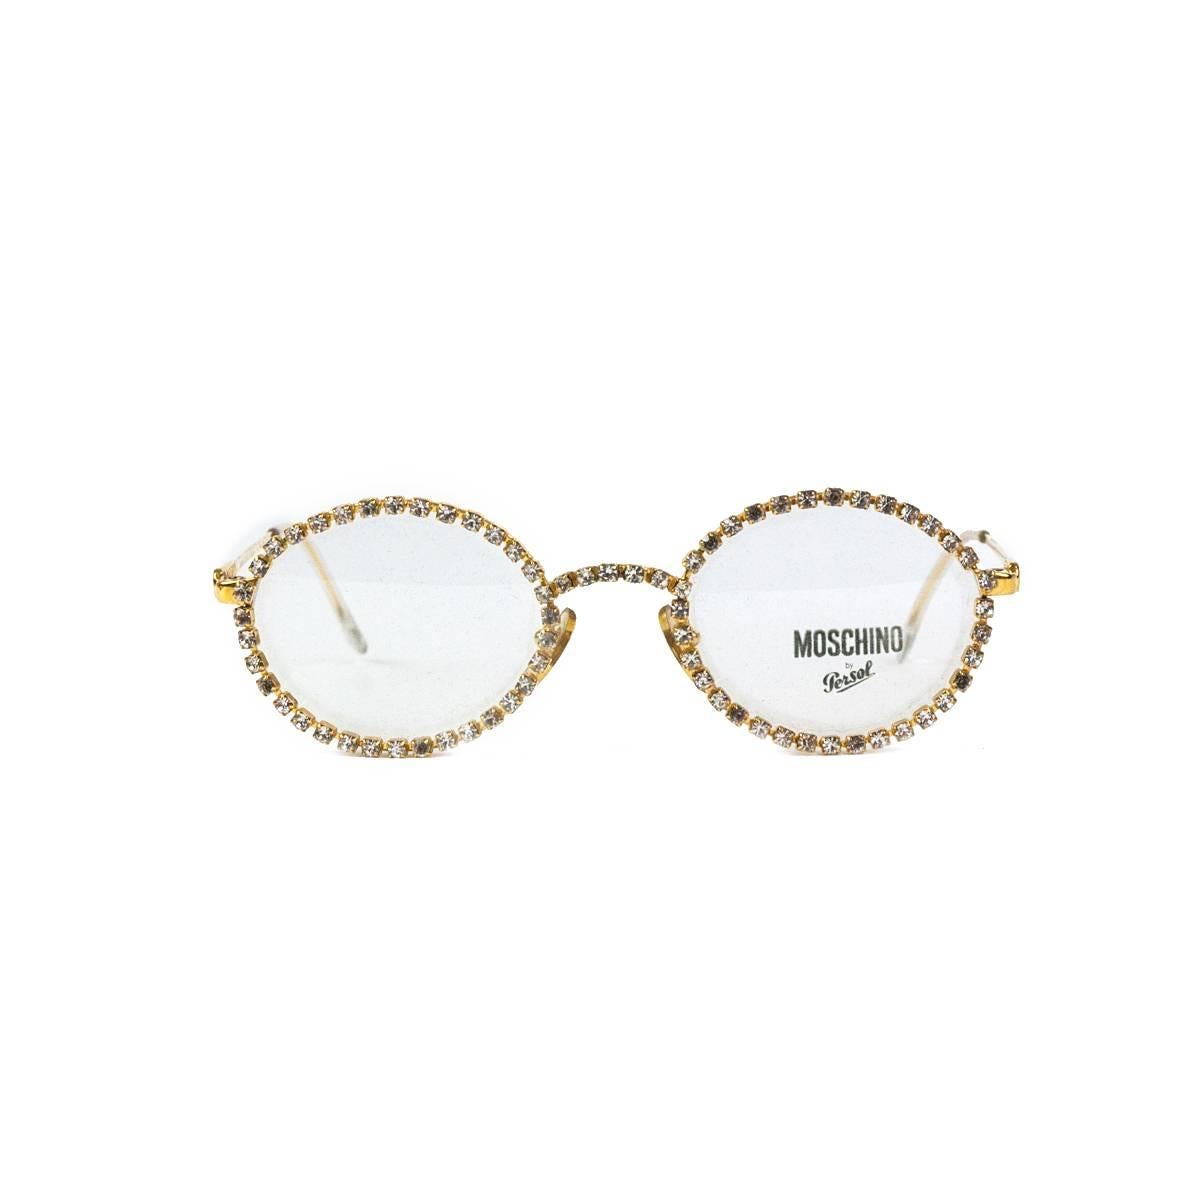 Fantastic and ultra rare, special edition
Moschino by Persol, mid 80's
Round structure
Beautiful golden frame with rhinestones
Not p
Comes with original golden case
Made in Italy
Worldwide express shipping included in the price !